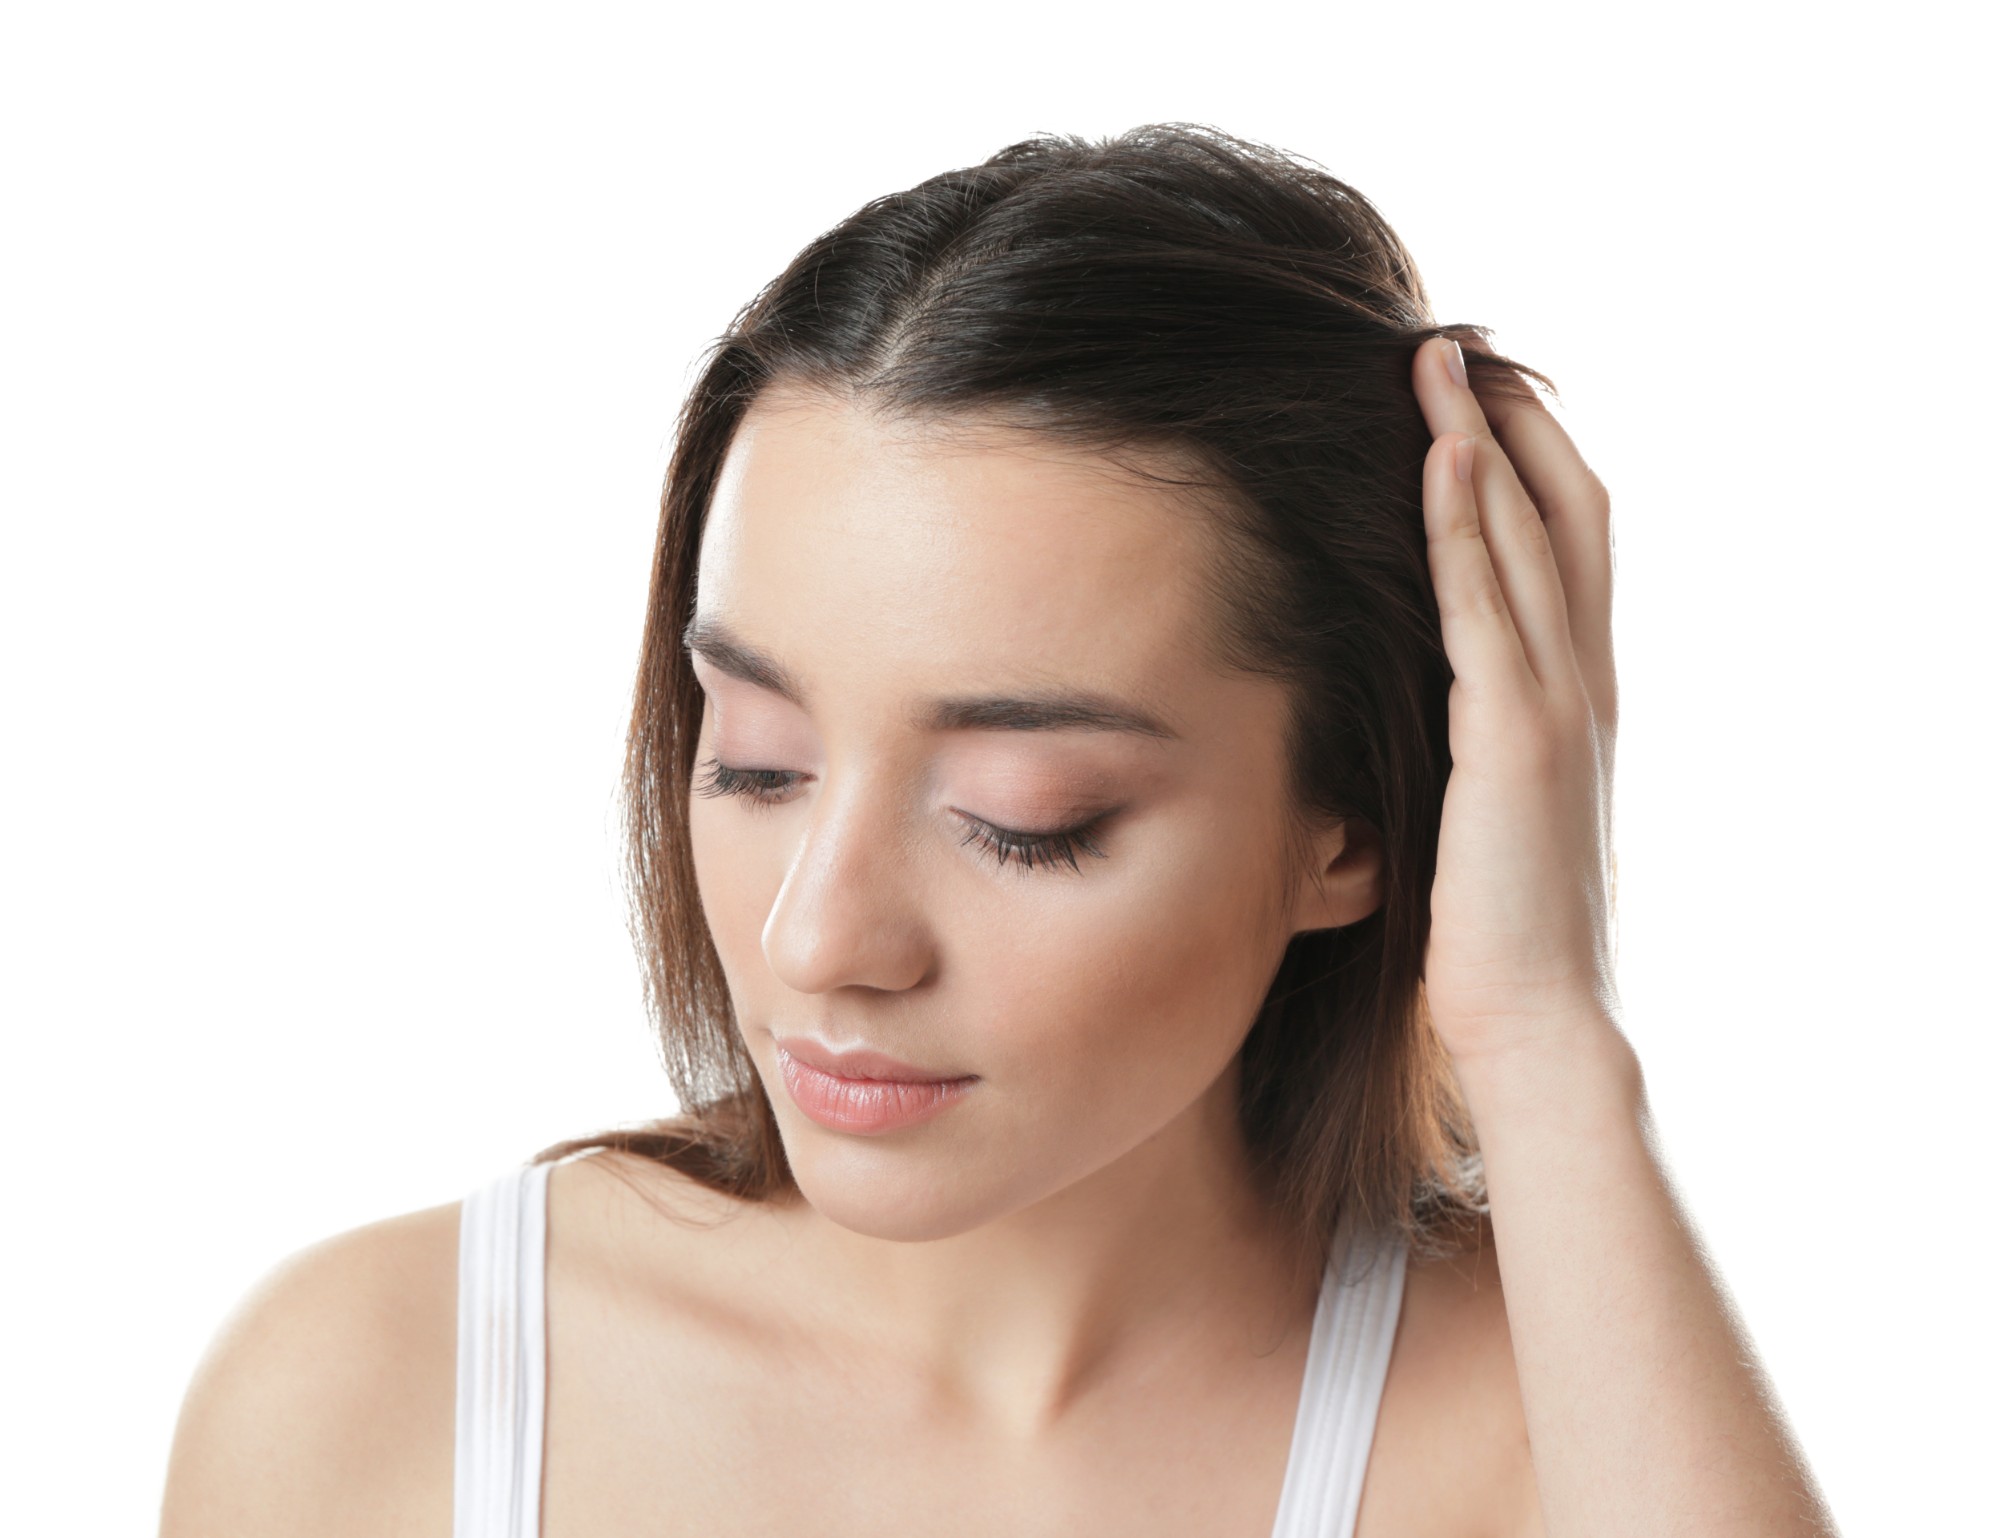 hair fall: Girl is flipping a small section of hair away from her face